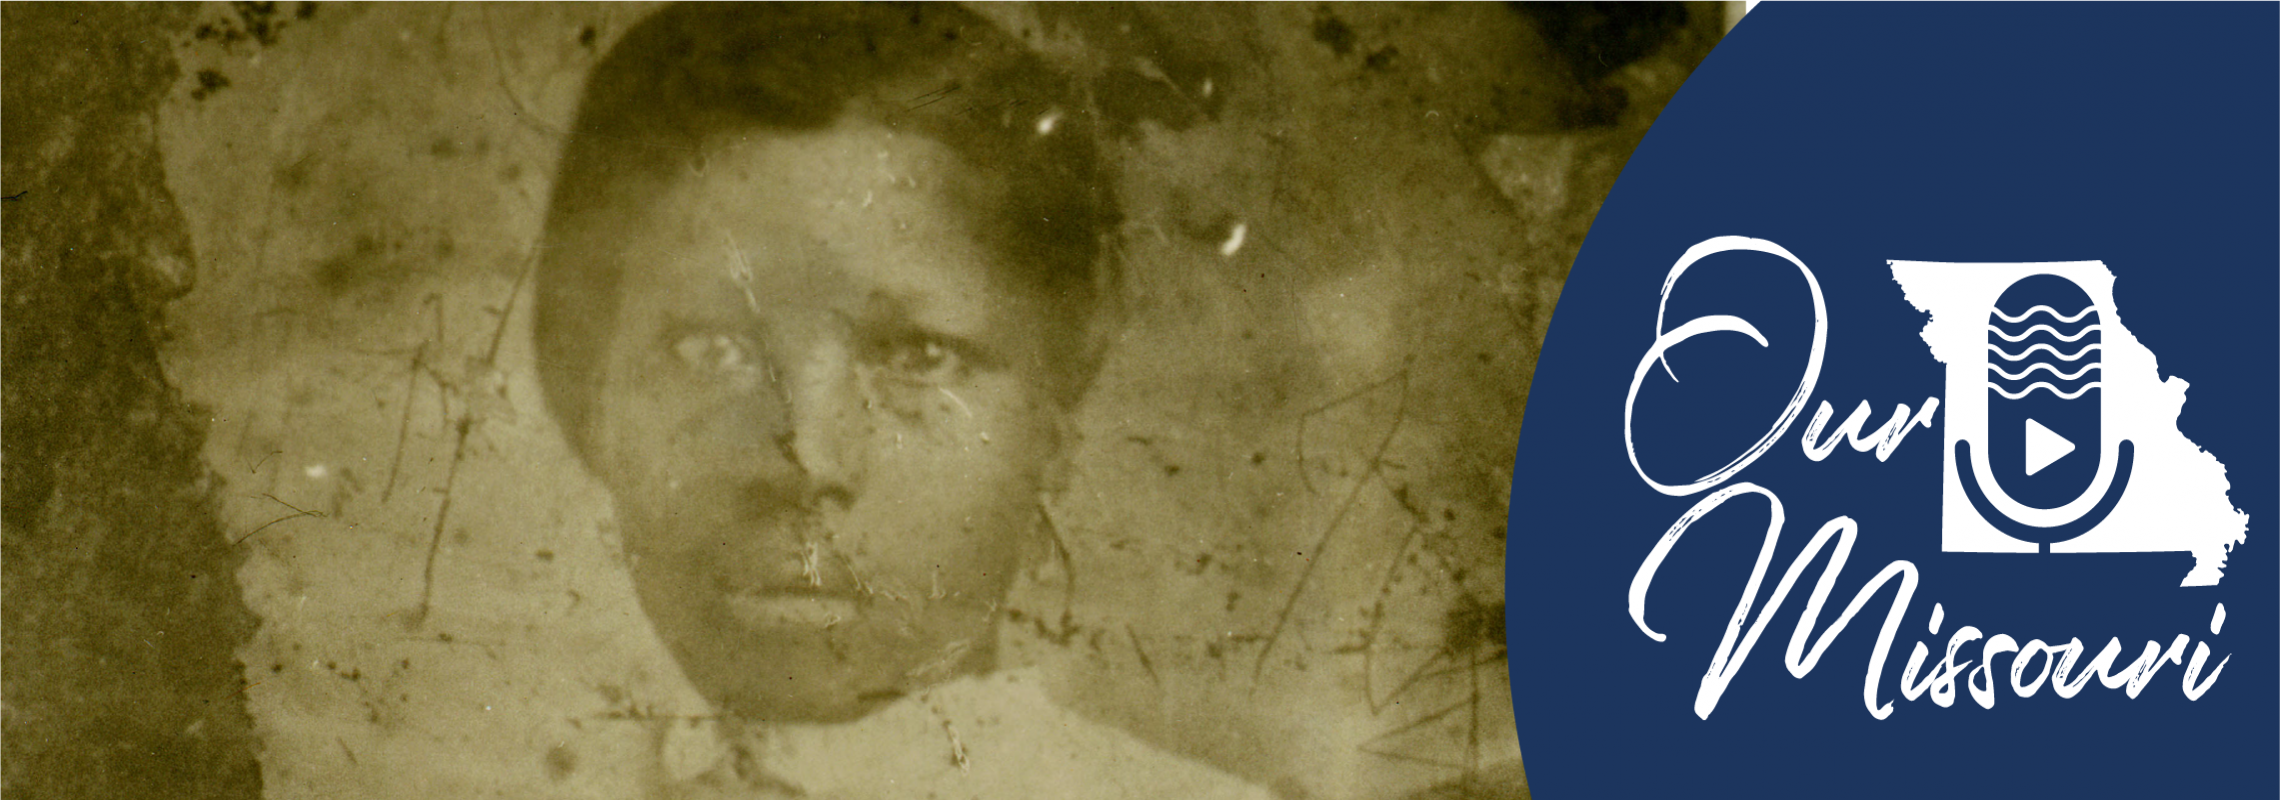 Susan "Suse" Younger, a slave, ca. 1855. [B. James George Sr. Photograph Collection, P0010-024249]]